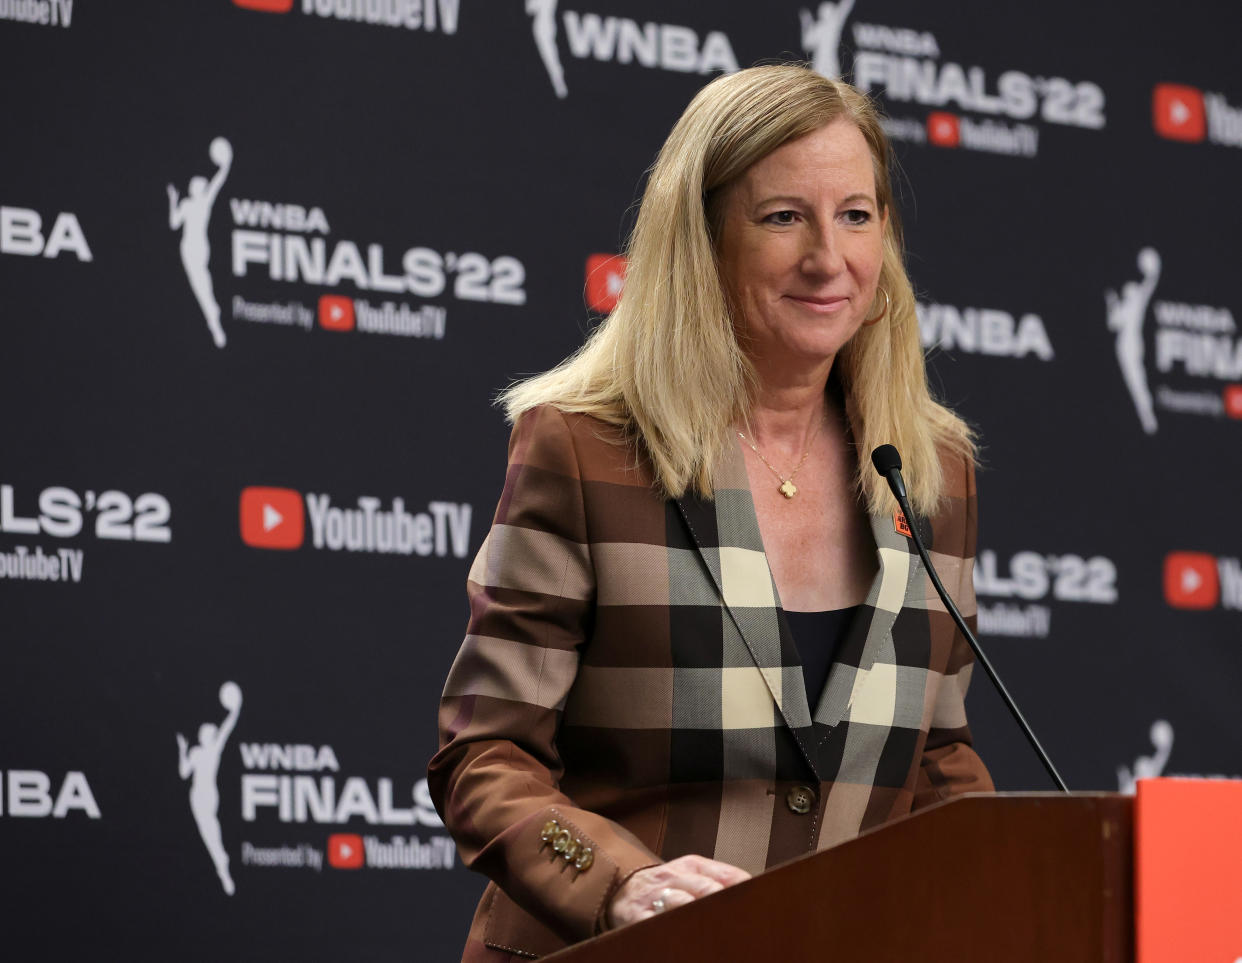 WNBA Commissioner Cathy Engelbert announced league approval for full-time charter flights starting this season. (Ethan Miller/Getty Images)